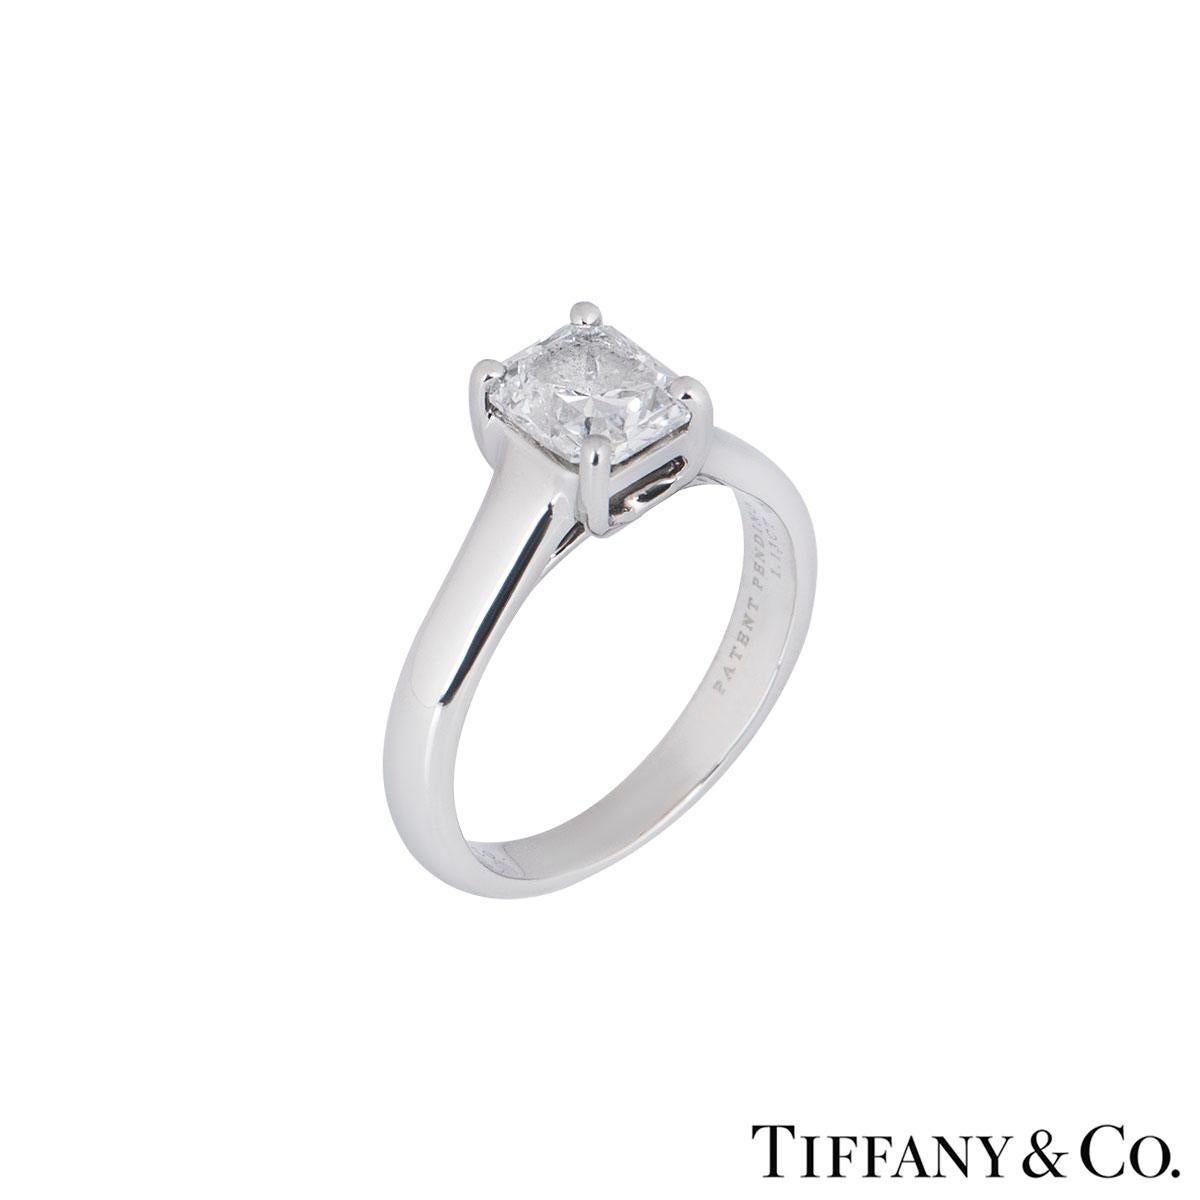 A stunning platinum Tiffany & Co. diamond ring from the Lucida collection. The ring comprises of a Lucida cut diamond in a 4 claw setting with a weight of 1.13ct, D colour and VVS2 clarity. The ring is a size UK J/US 4.75/EU 49 but can be adjusted